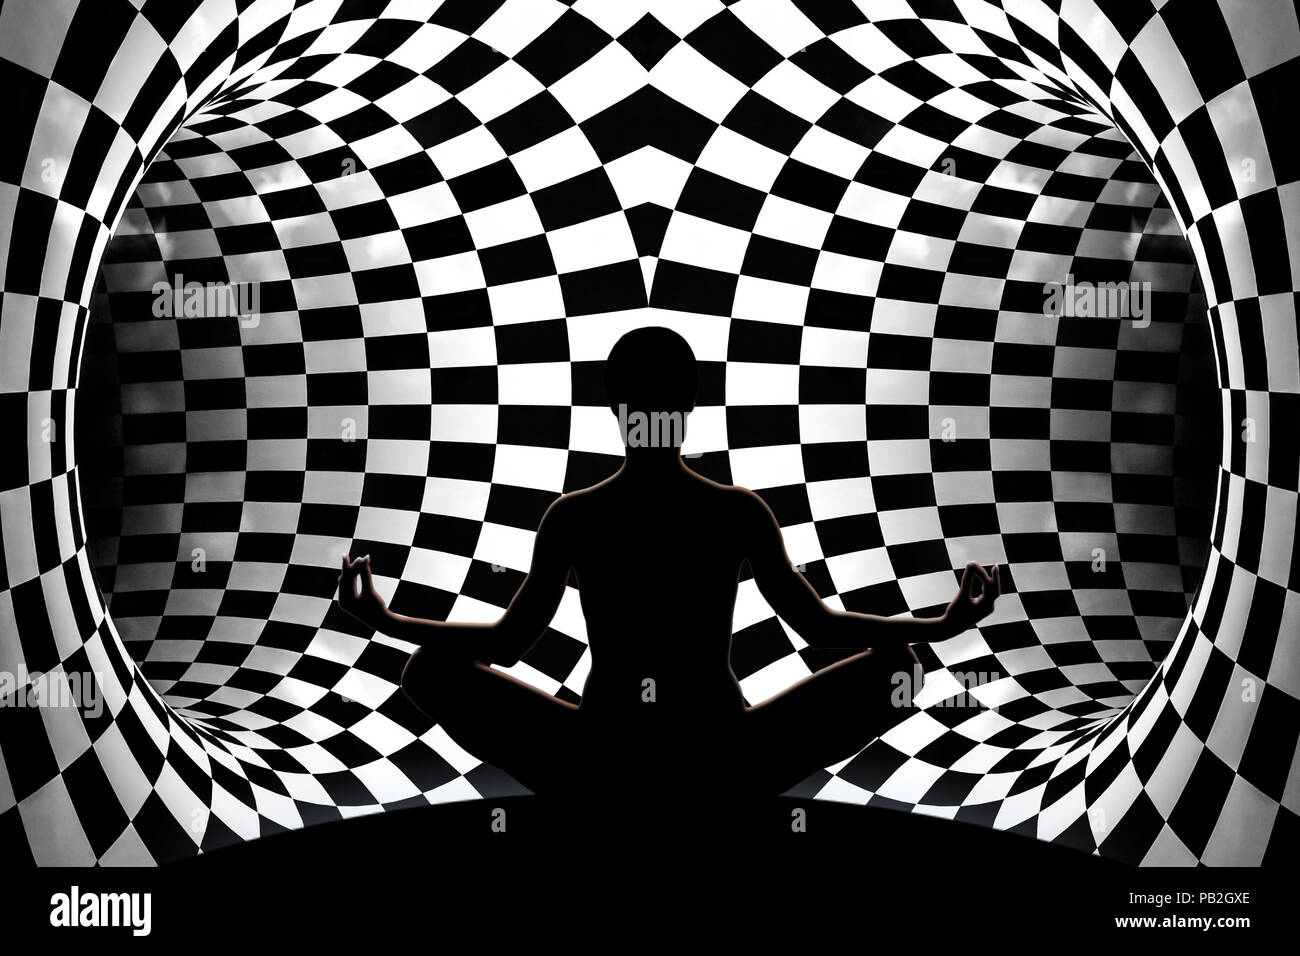 Female yoga figure in front of two dark tunnels before the decision which is the right choice. Stock Photo